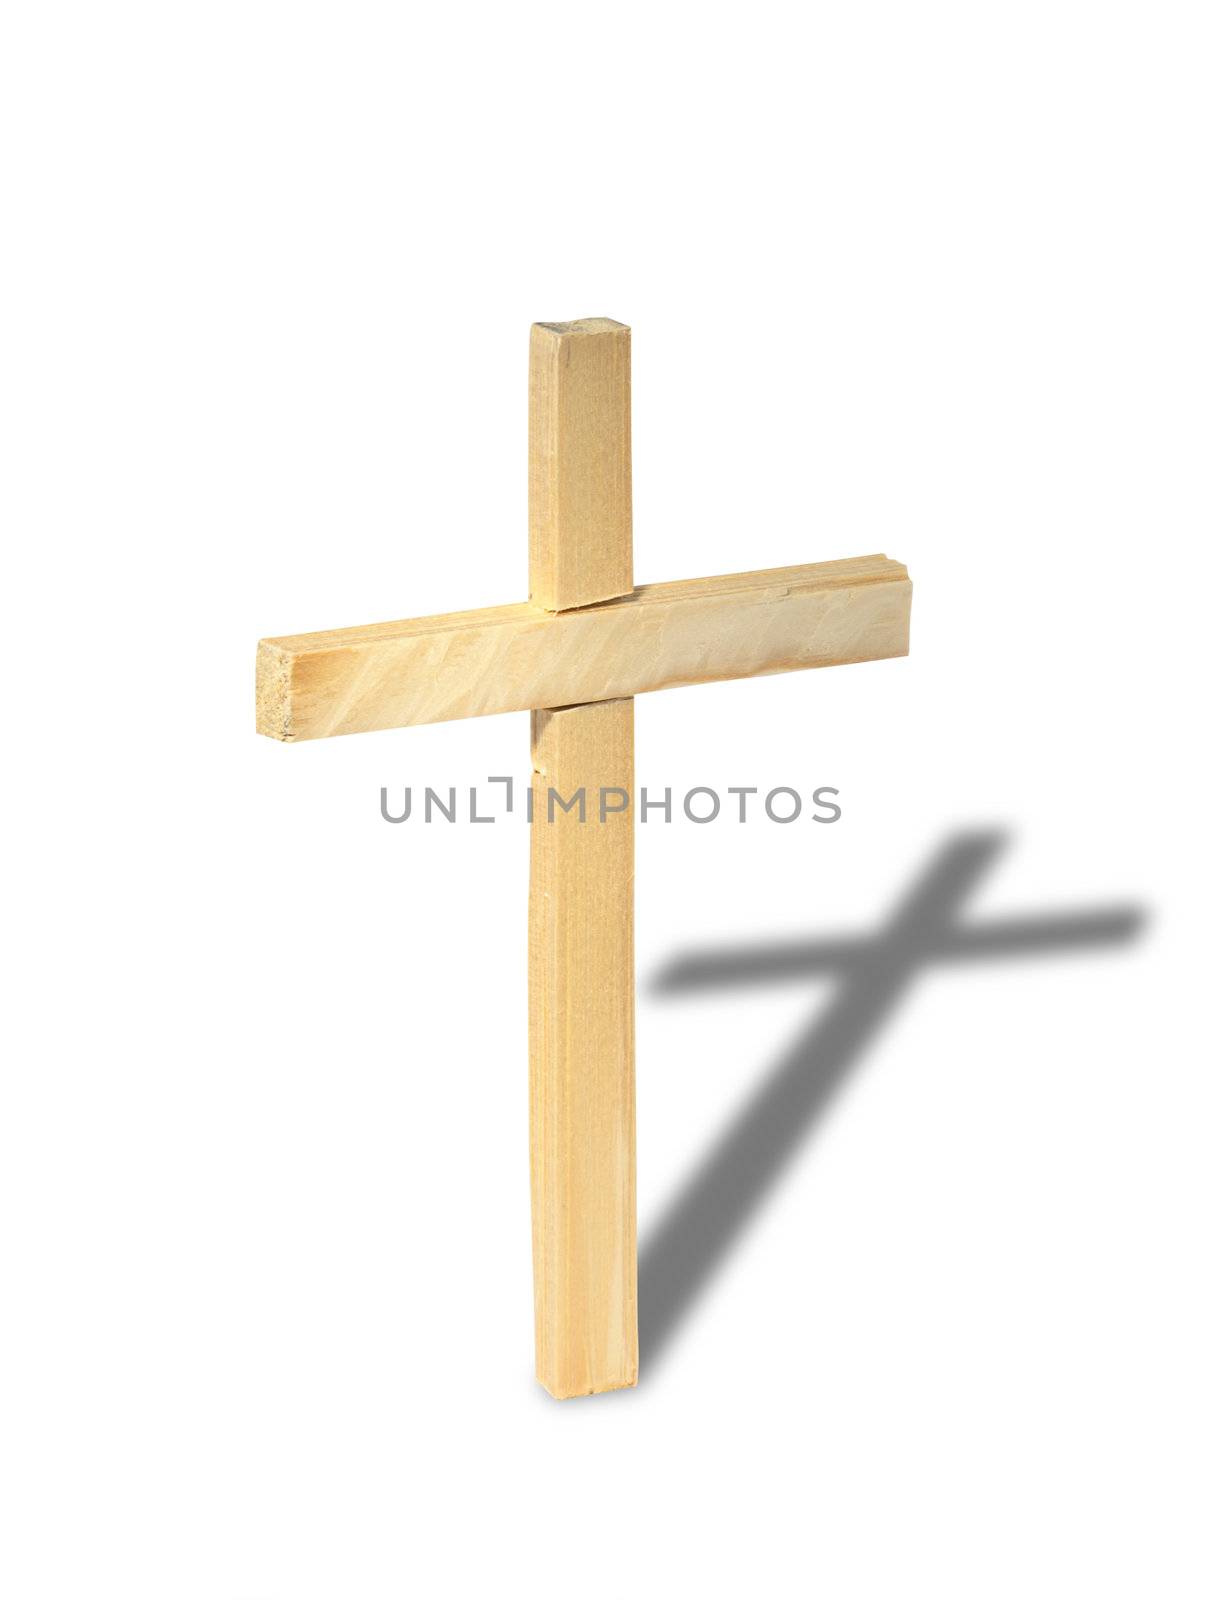 Single wooden cross standing on white background. Isolated with clipping path